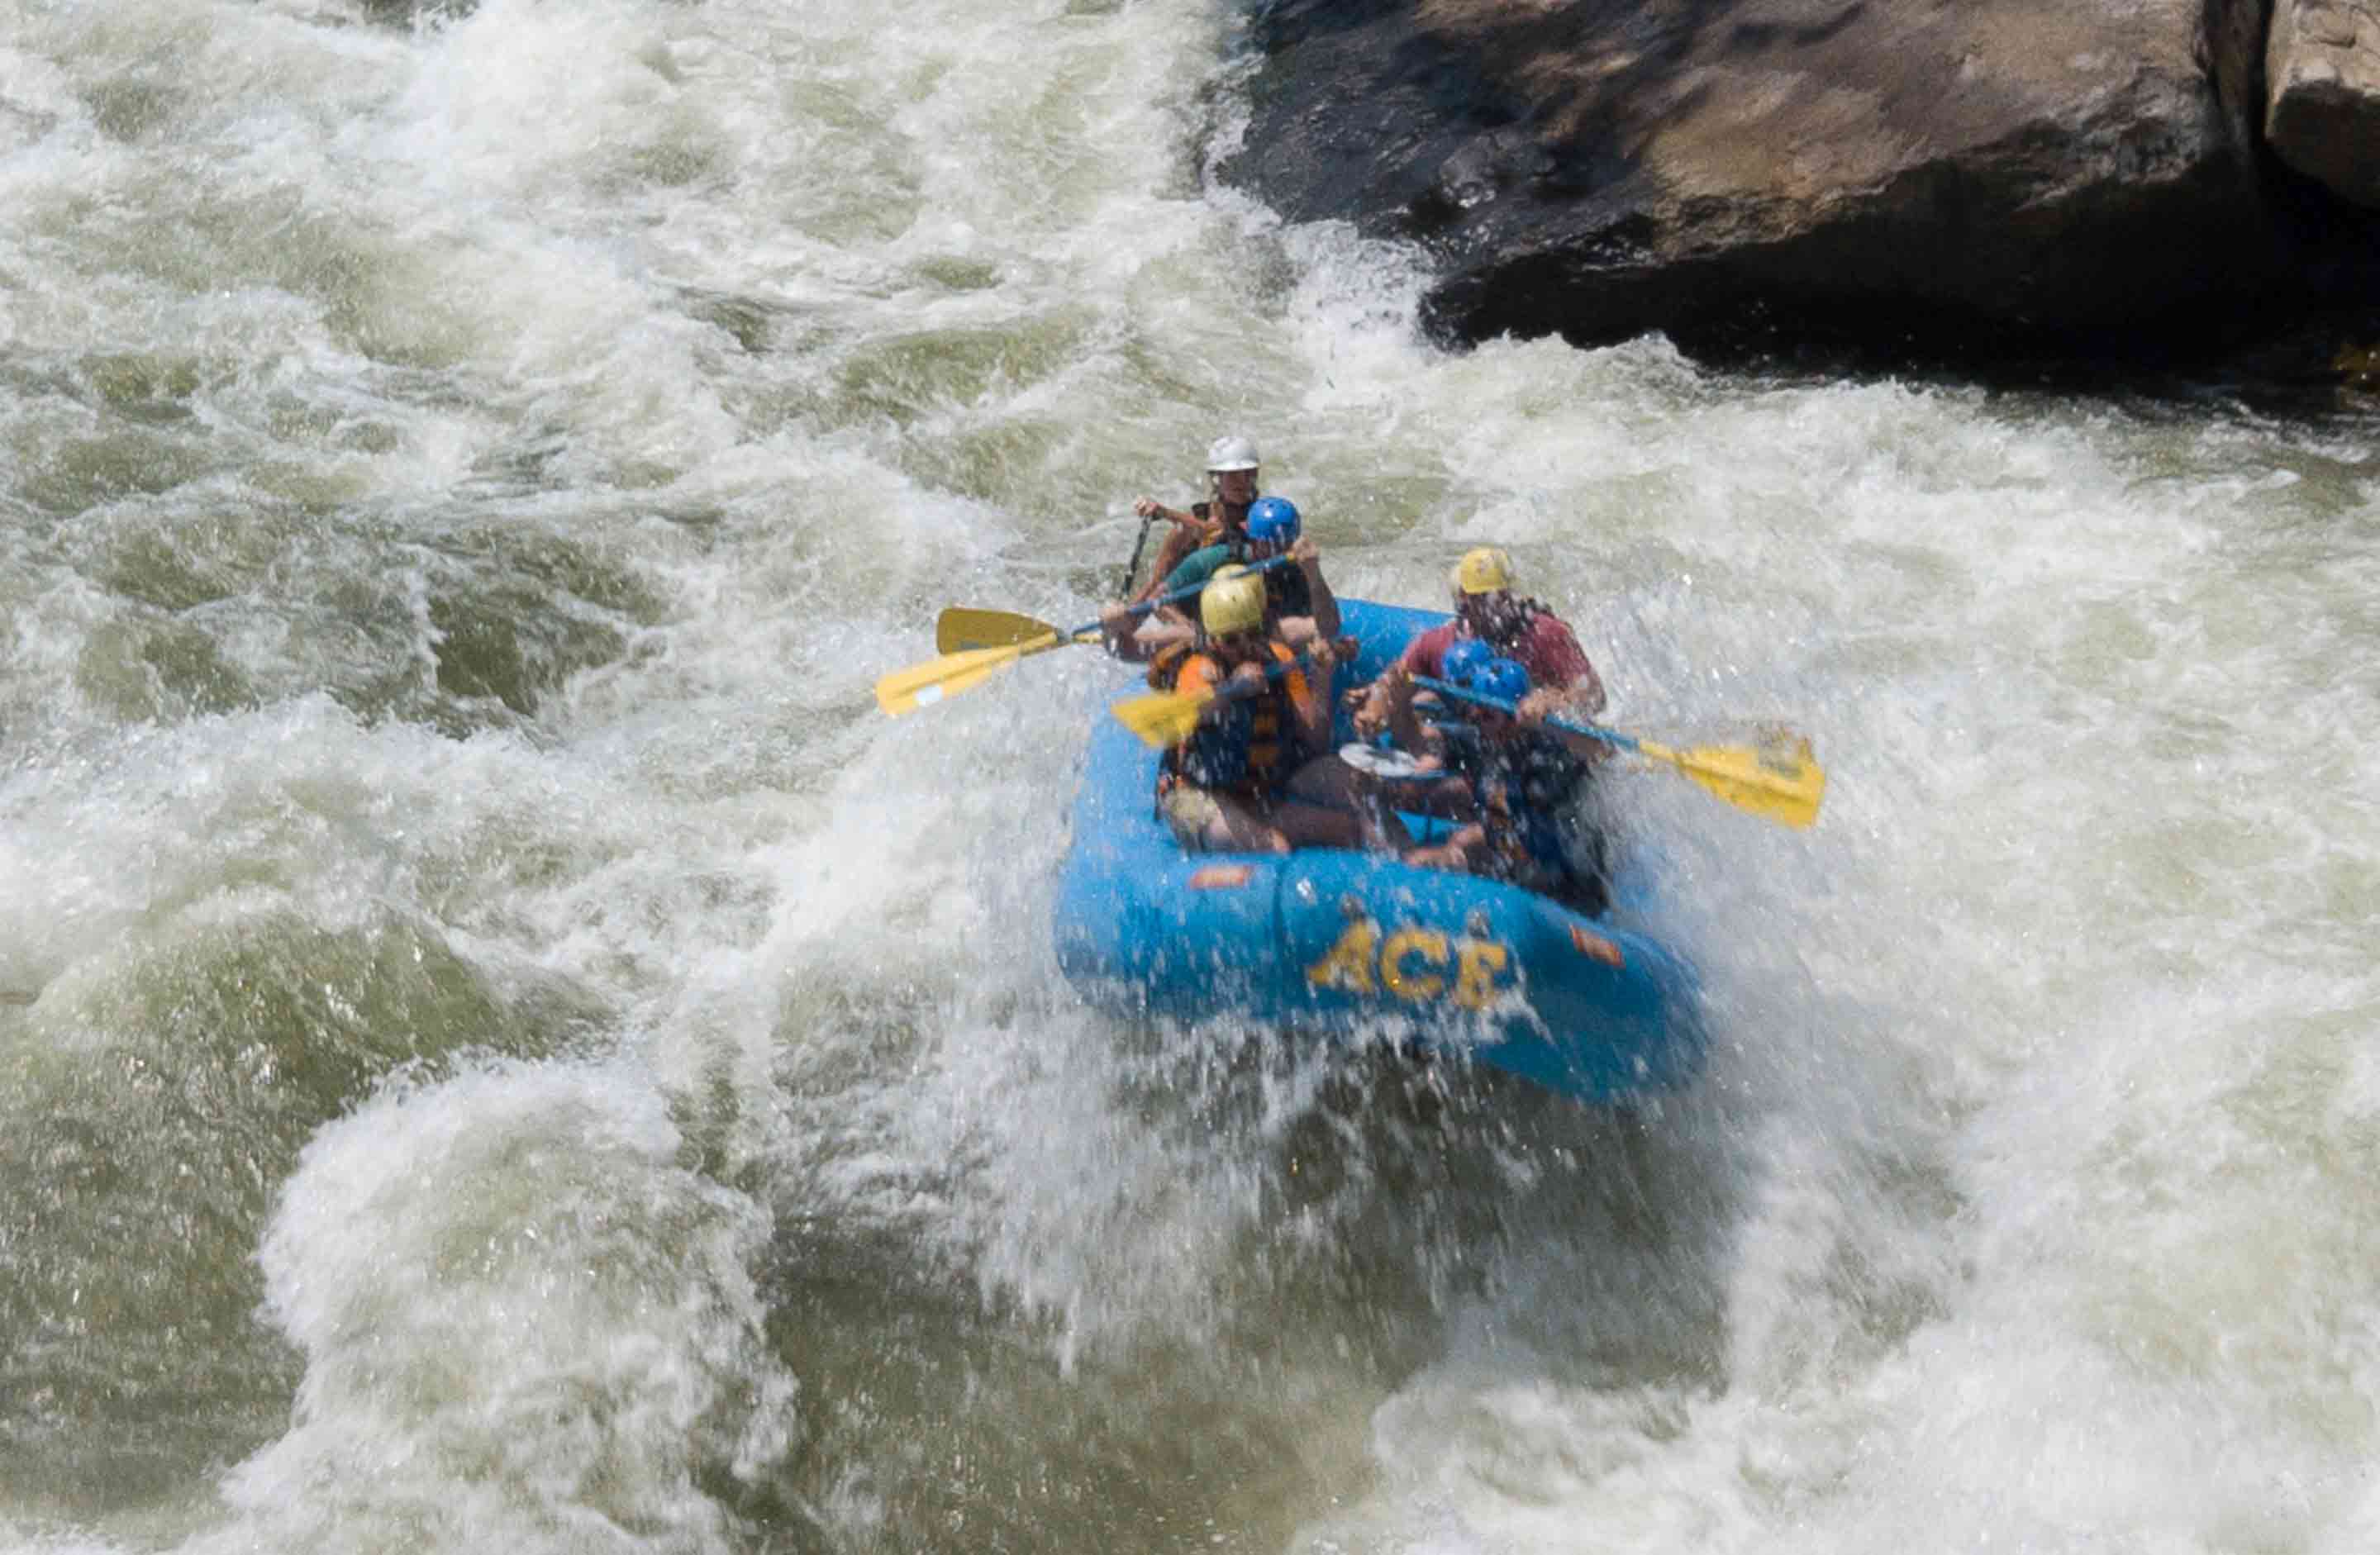 Half Day Rafting New River Gorge - riviera hobby